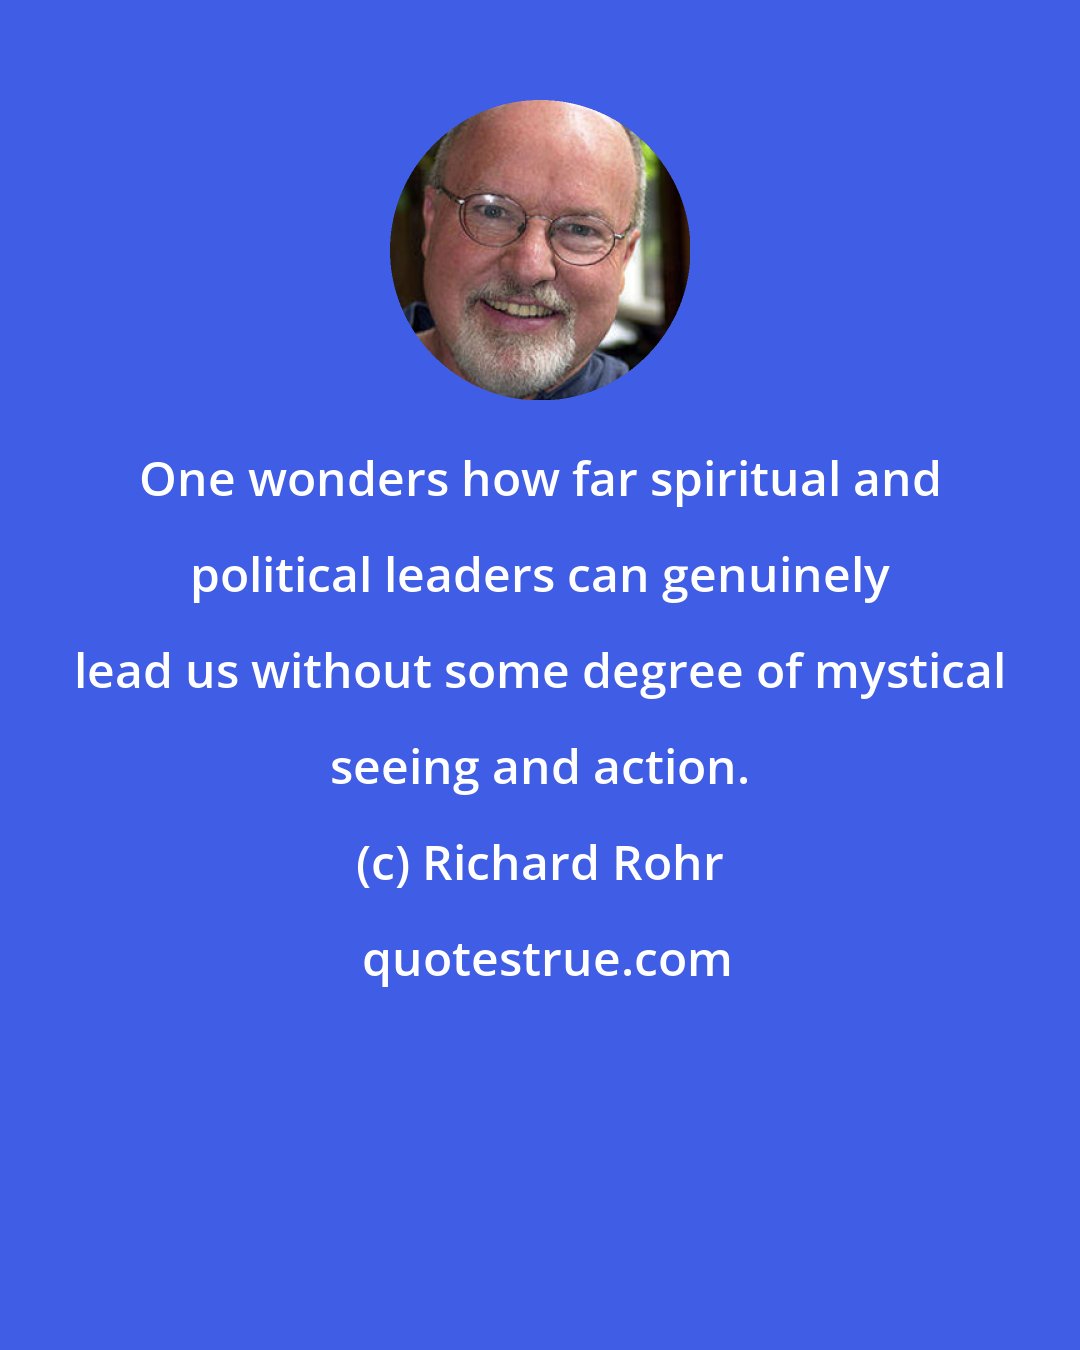 Richard Rohr: One wonders how far spiritual and political leaders can genuinely lead us without some degree of mystical seeing and action.